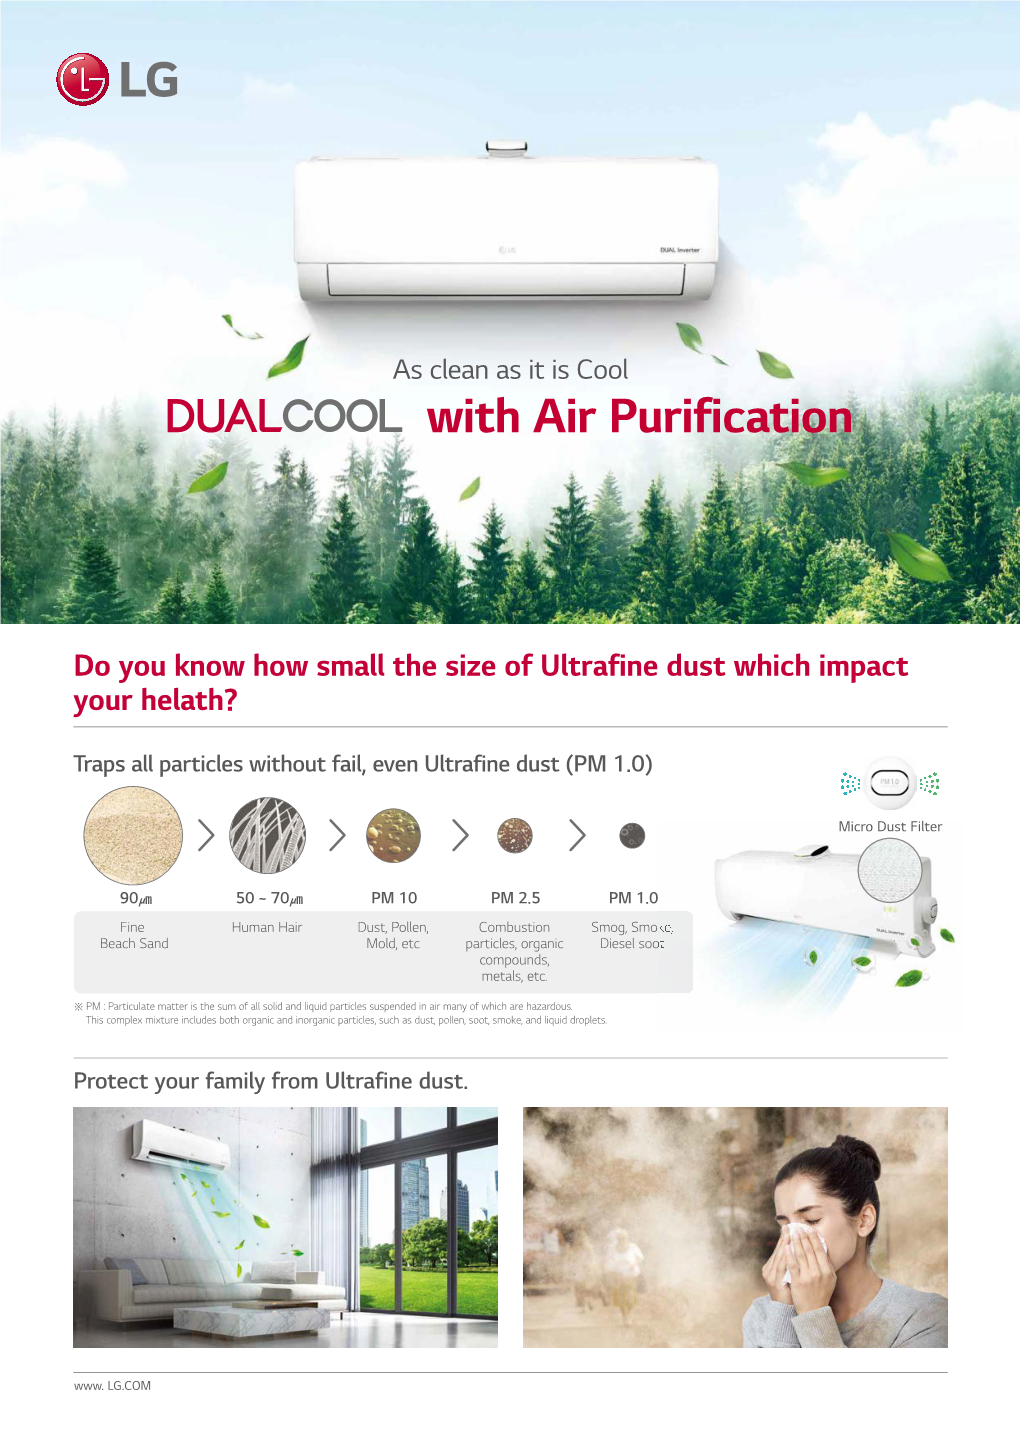 With Air Purification